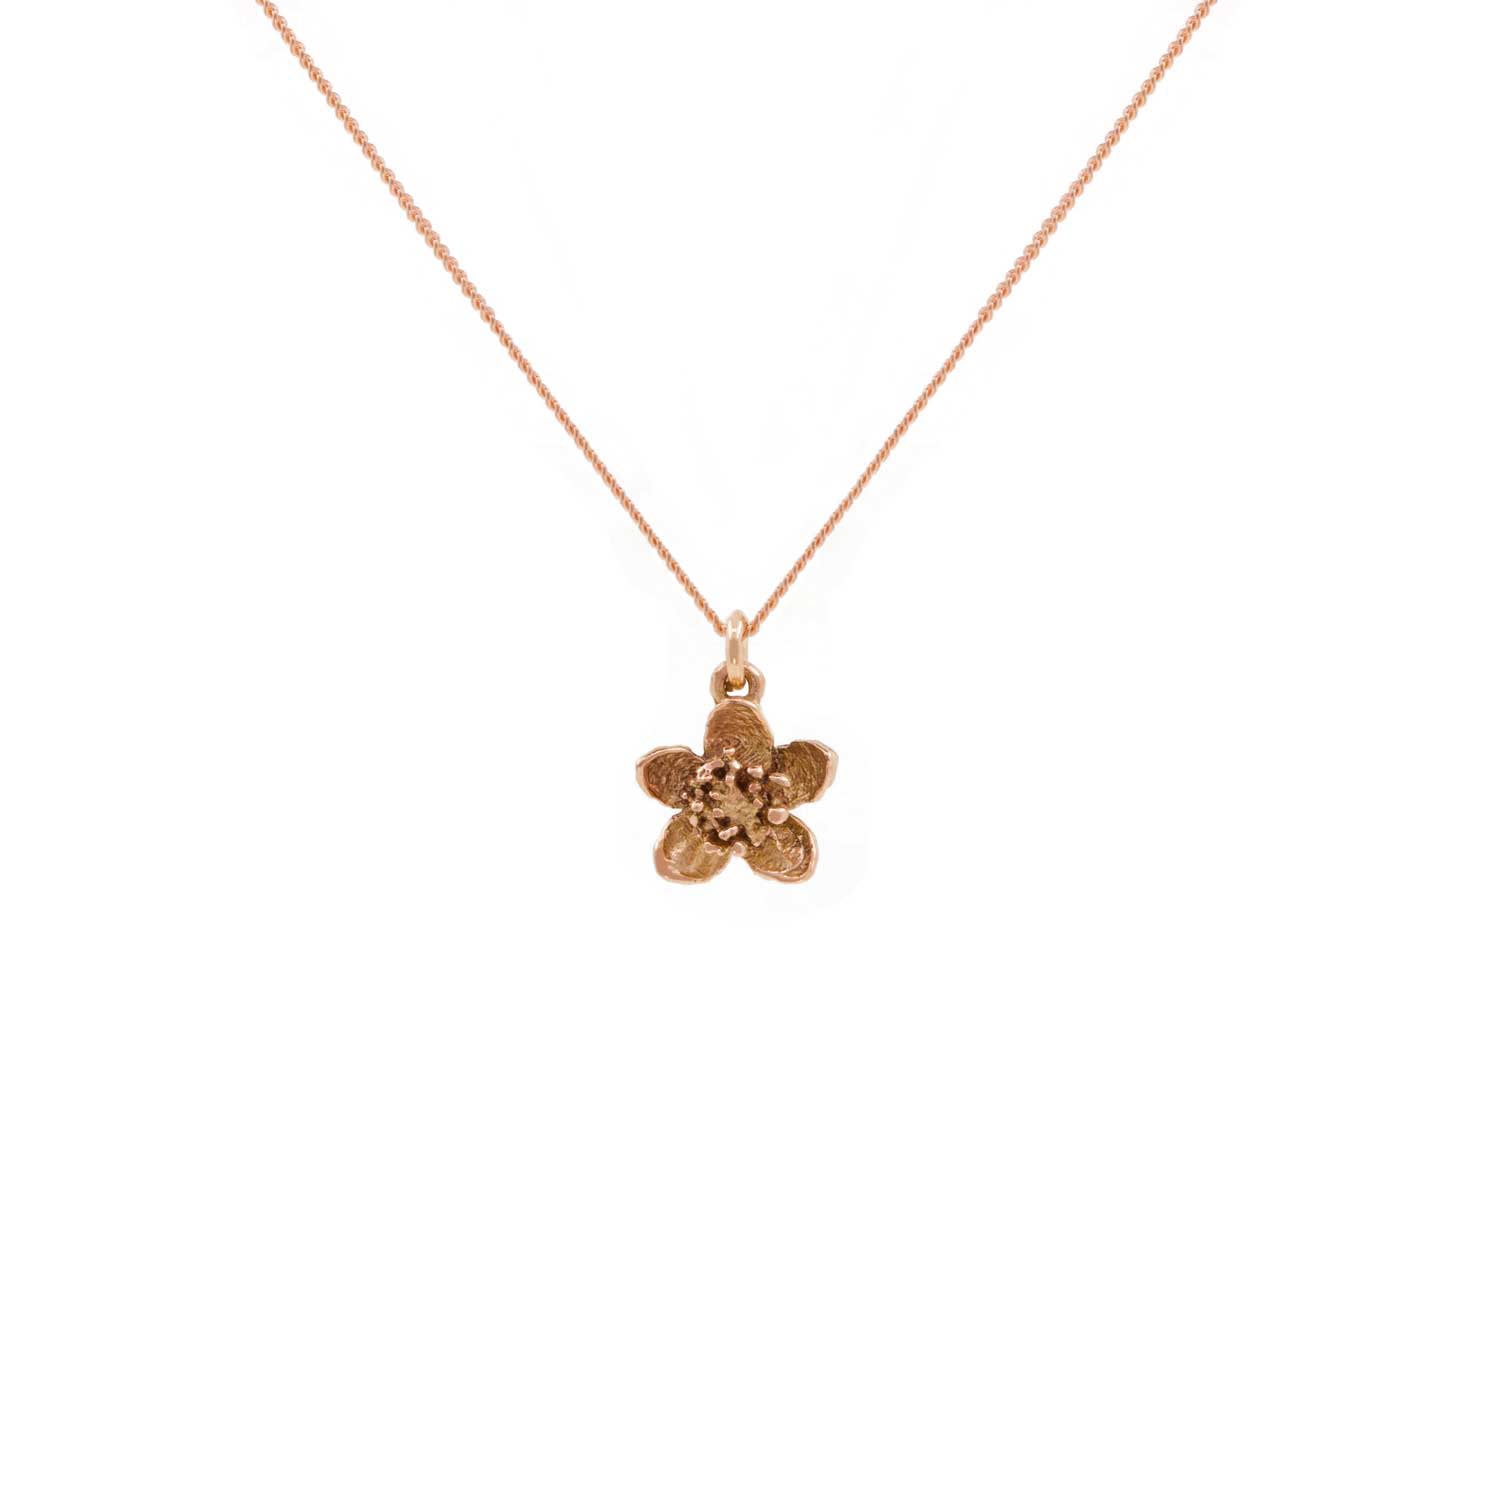 Lee Renee - Cherry Blossom Necklace - Rose Gold